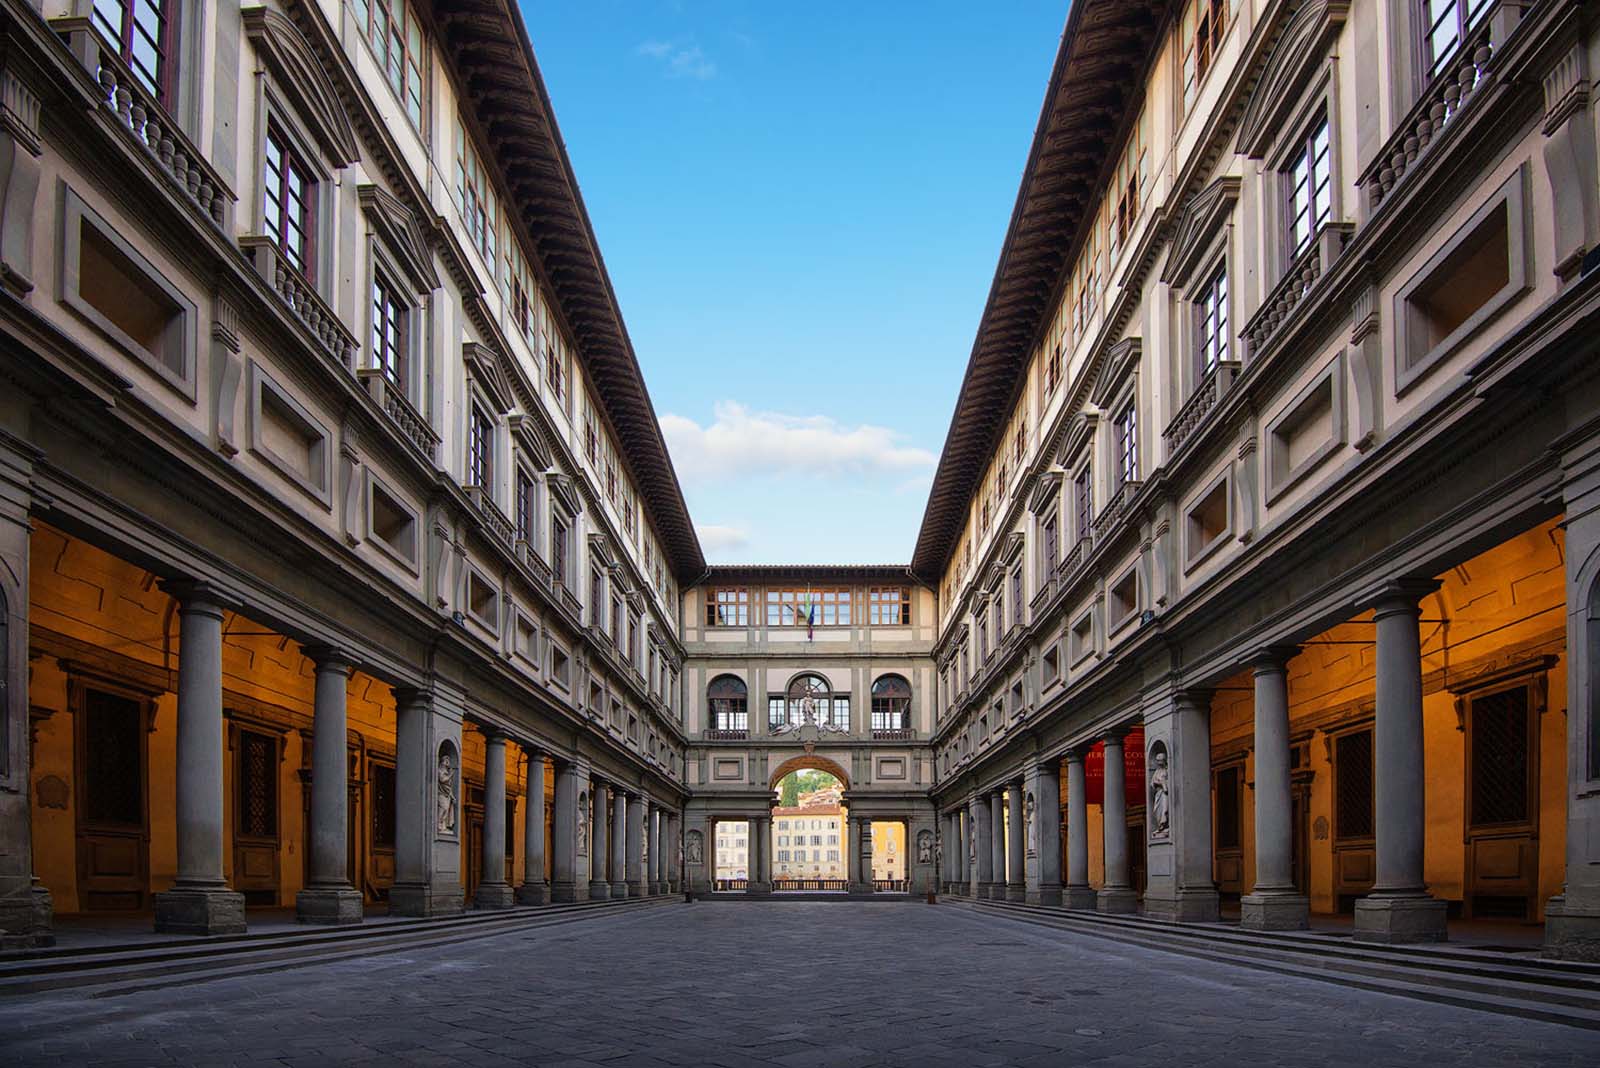 Uffizi Gallery Courtyard in Florence, Italy. © Max Foster